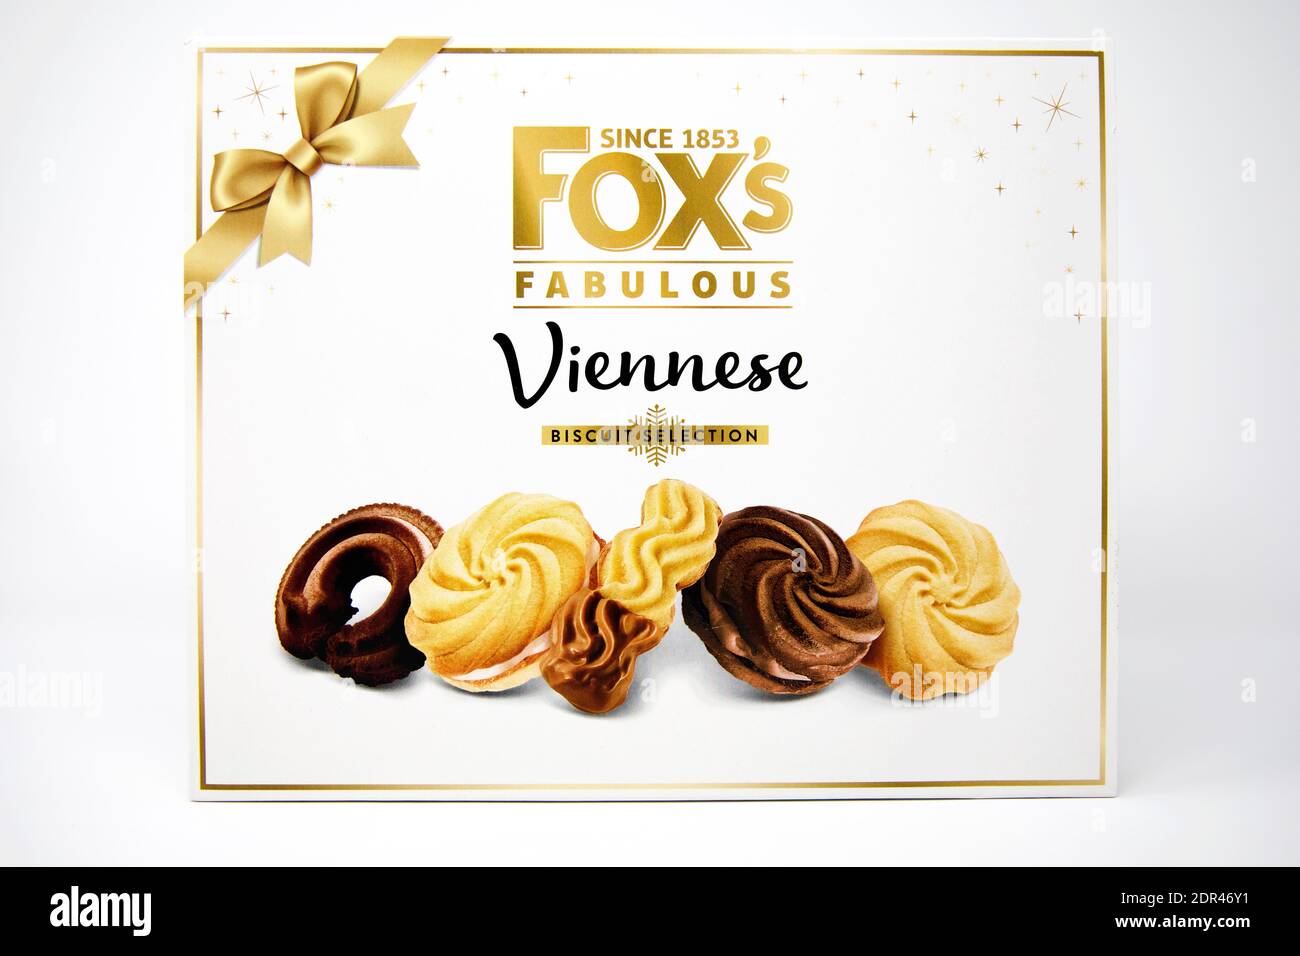 Fox's Fabulous Viennese Biscuit Selection Stockfoto